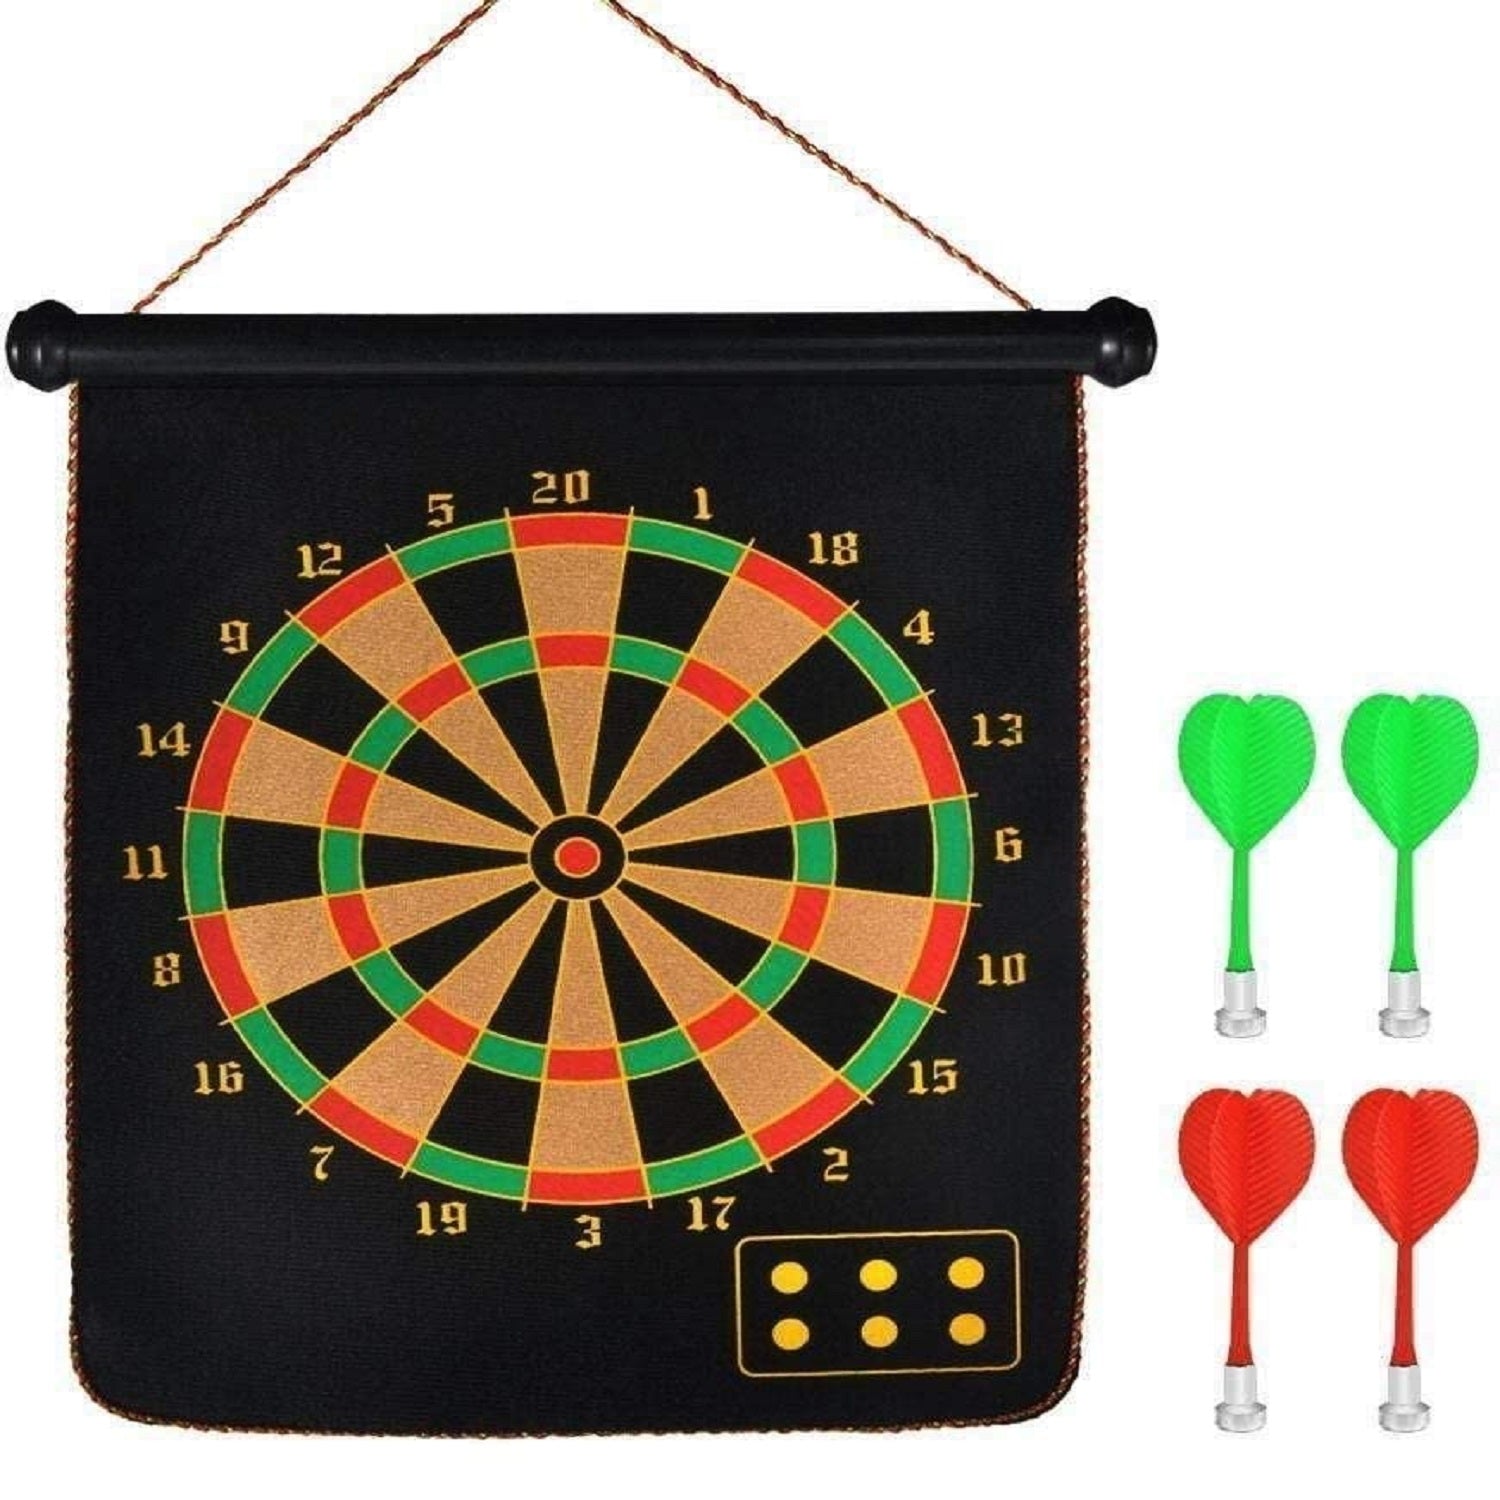 Magnetic Dart Game (Large) at best price in New Delhi by Toy Age India